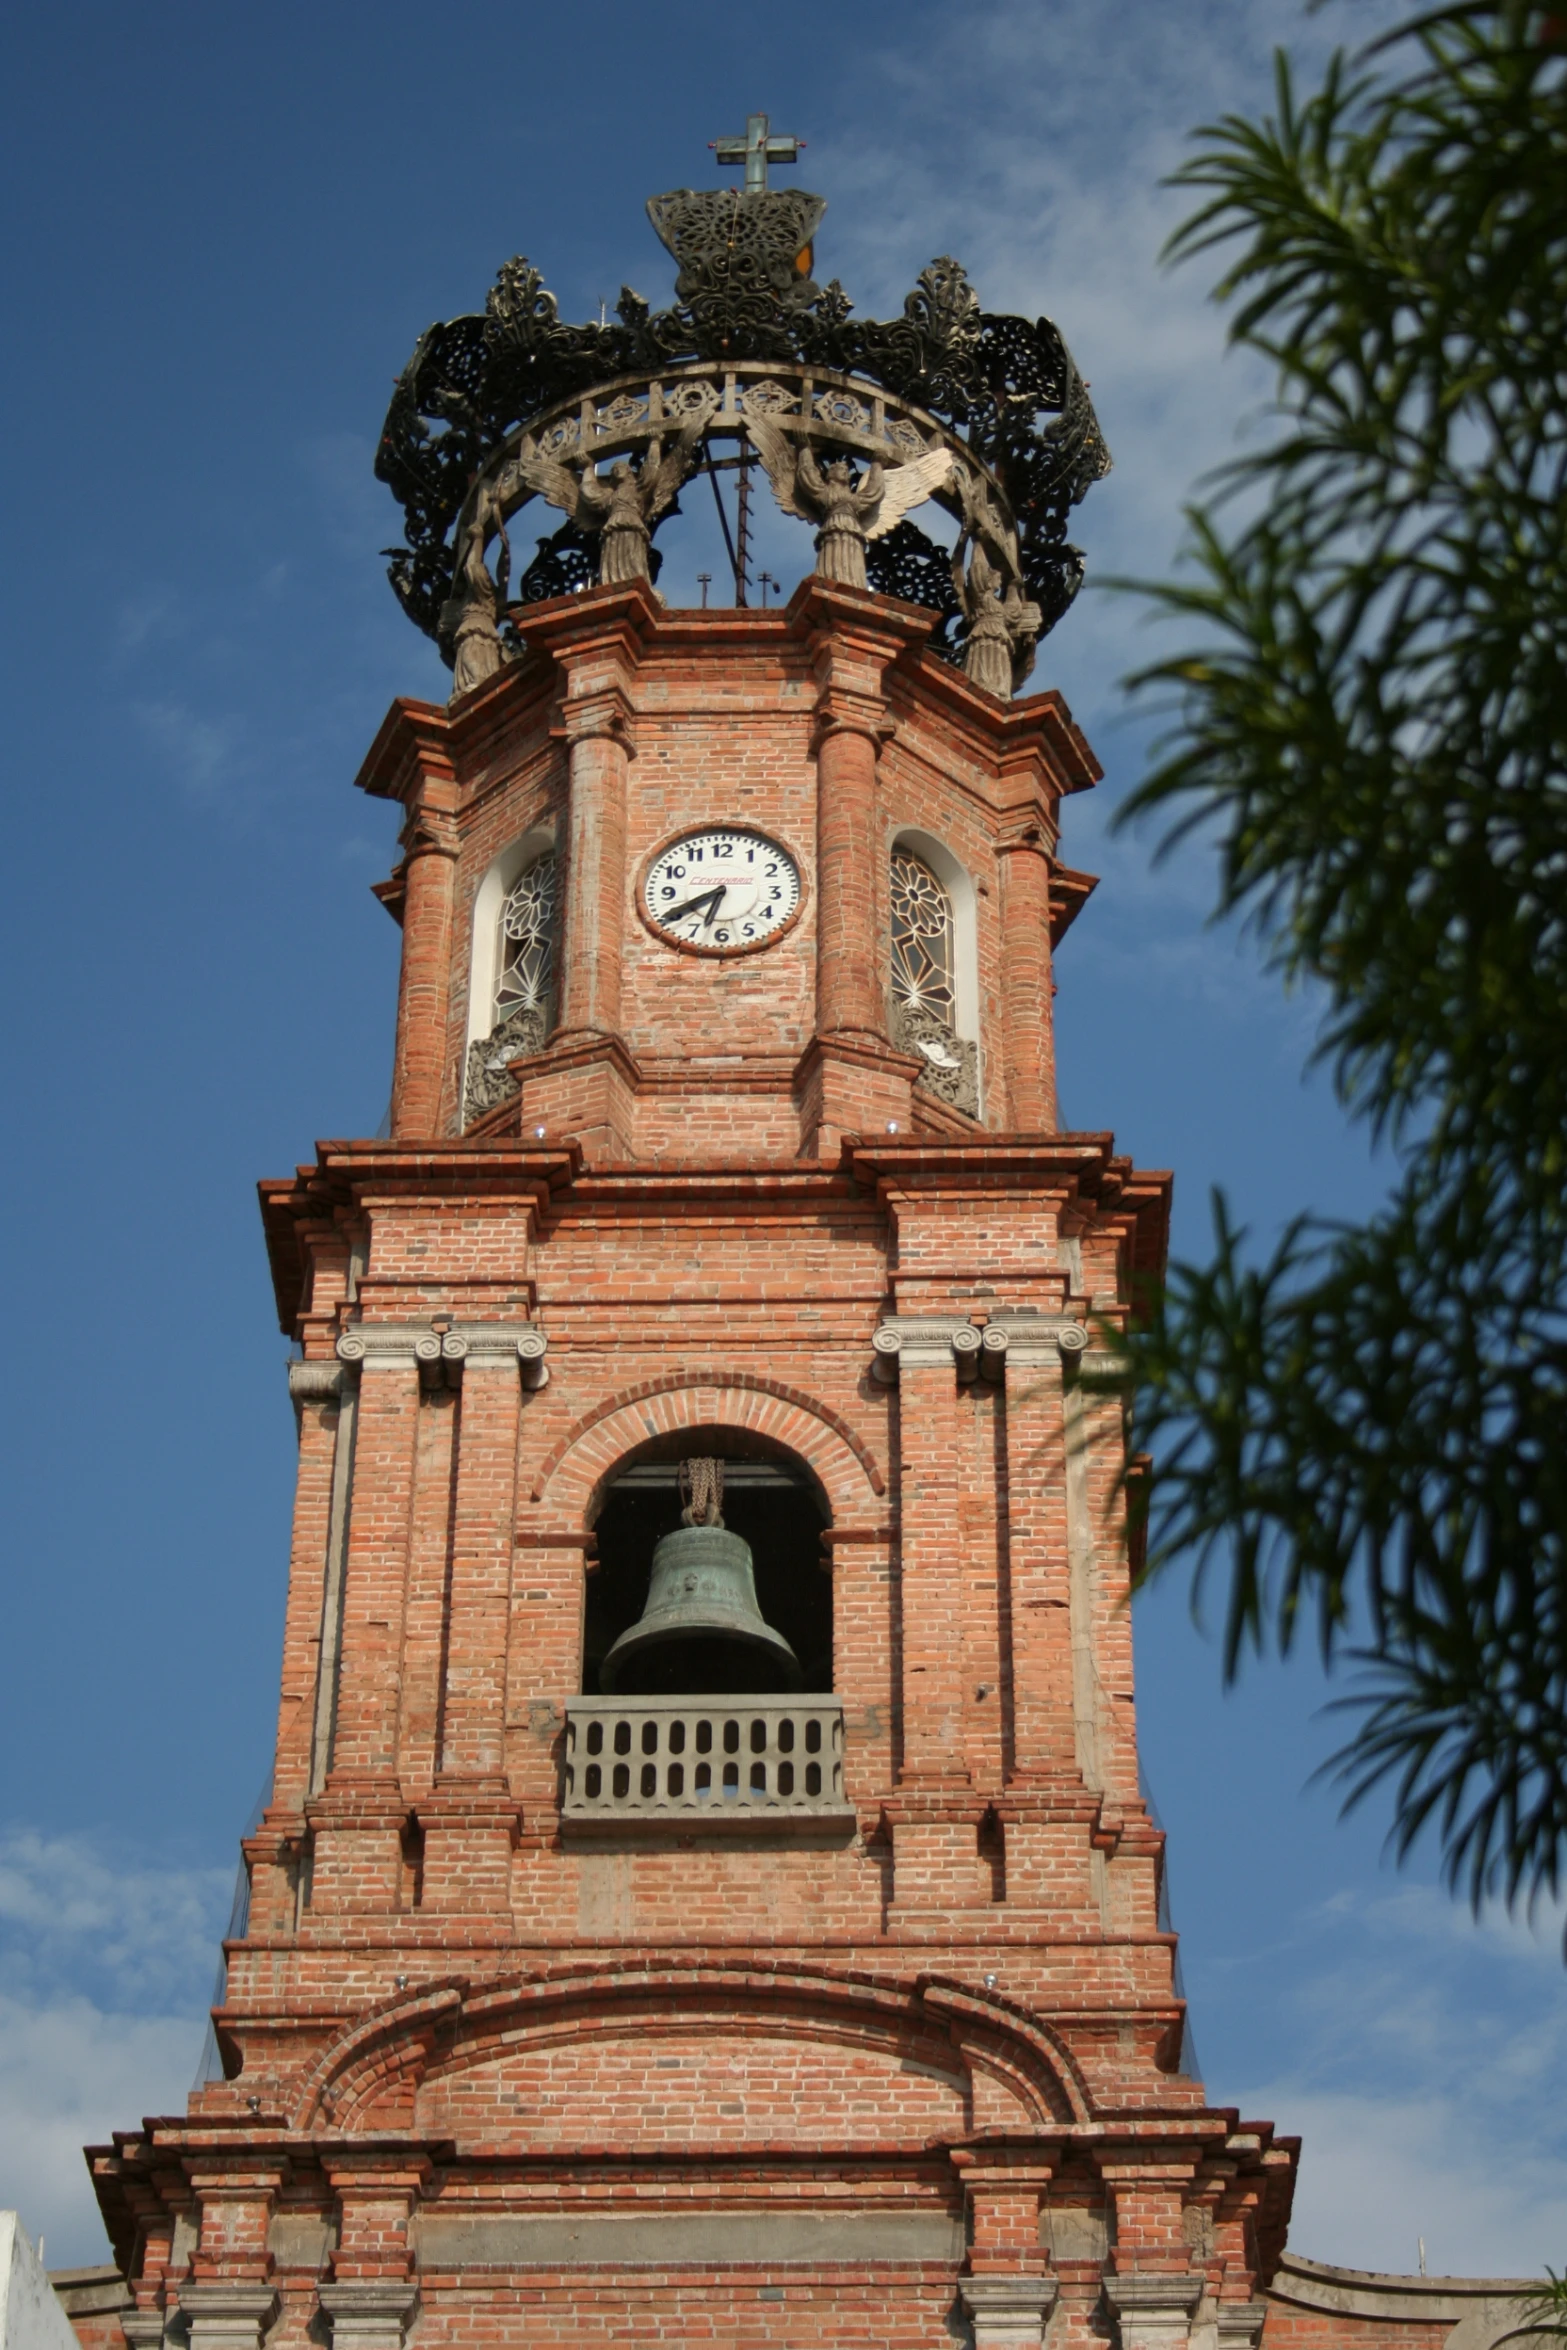 a large clock tower with ornate bells and a bell